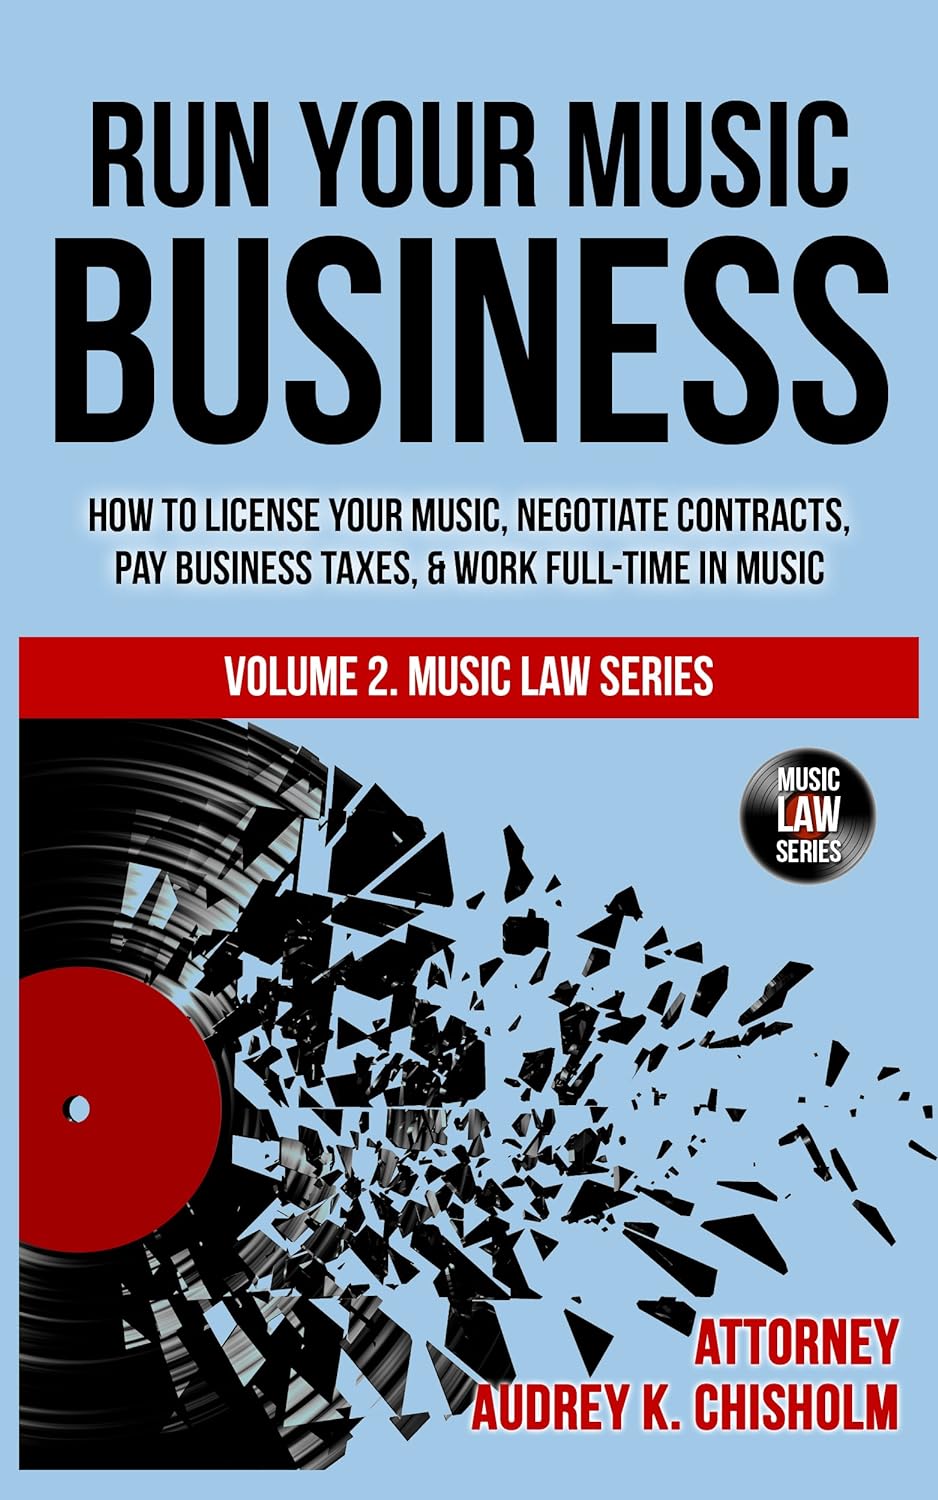 Run Your Music Business Book Cover